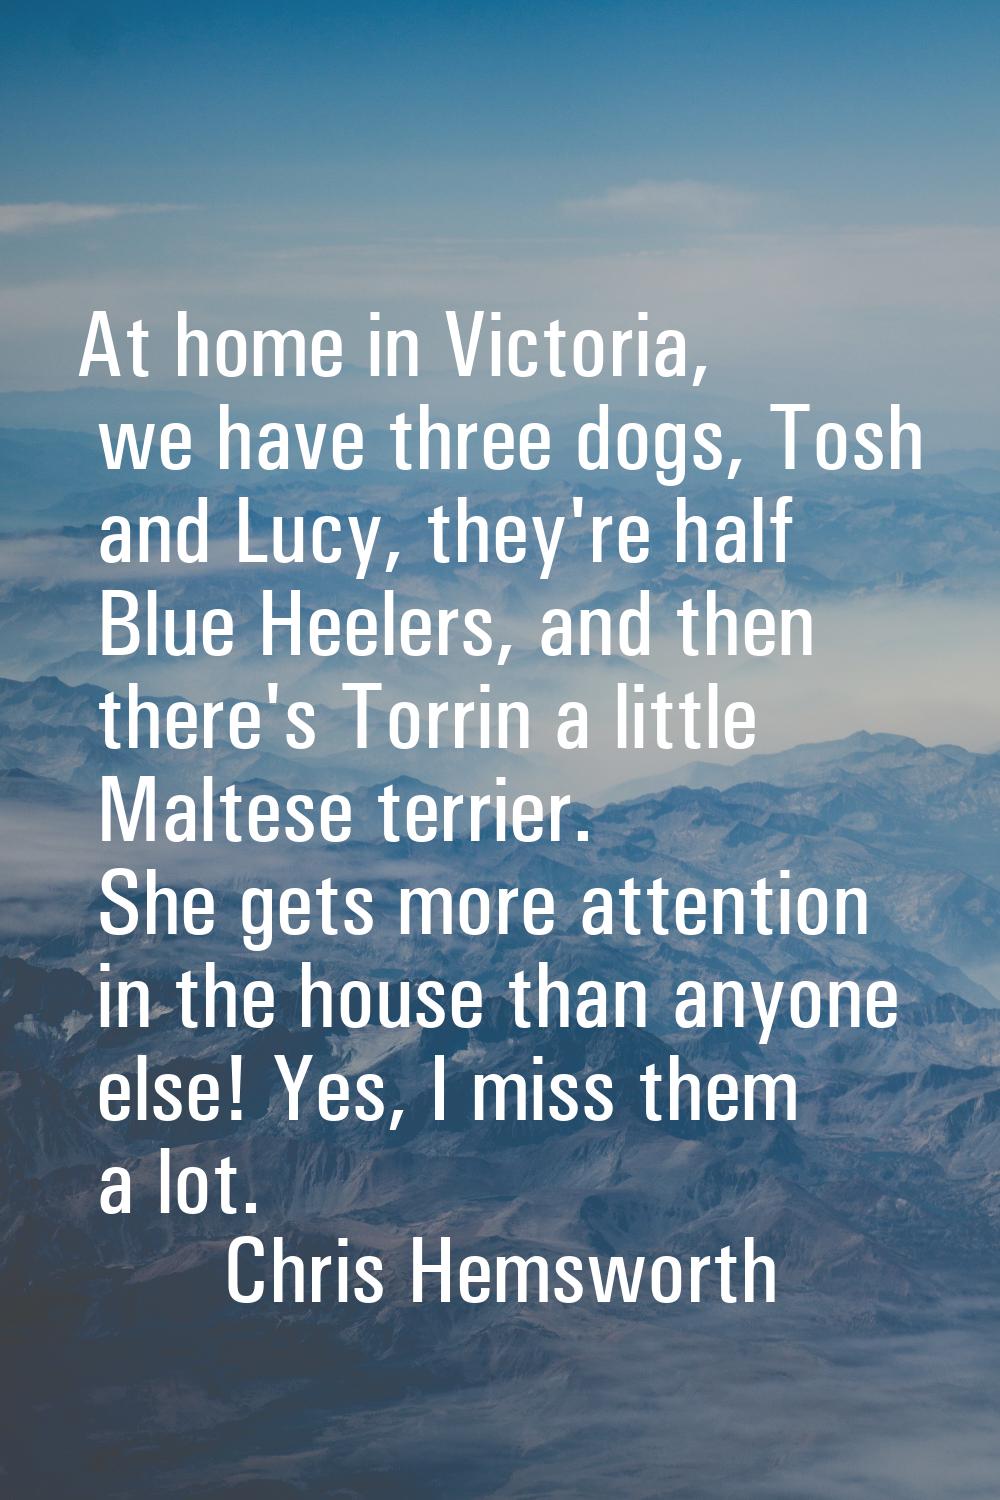 At home in Victoria, we have three dogs, Tosh and Lucy, they're half Blue Heelers, and then there's